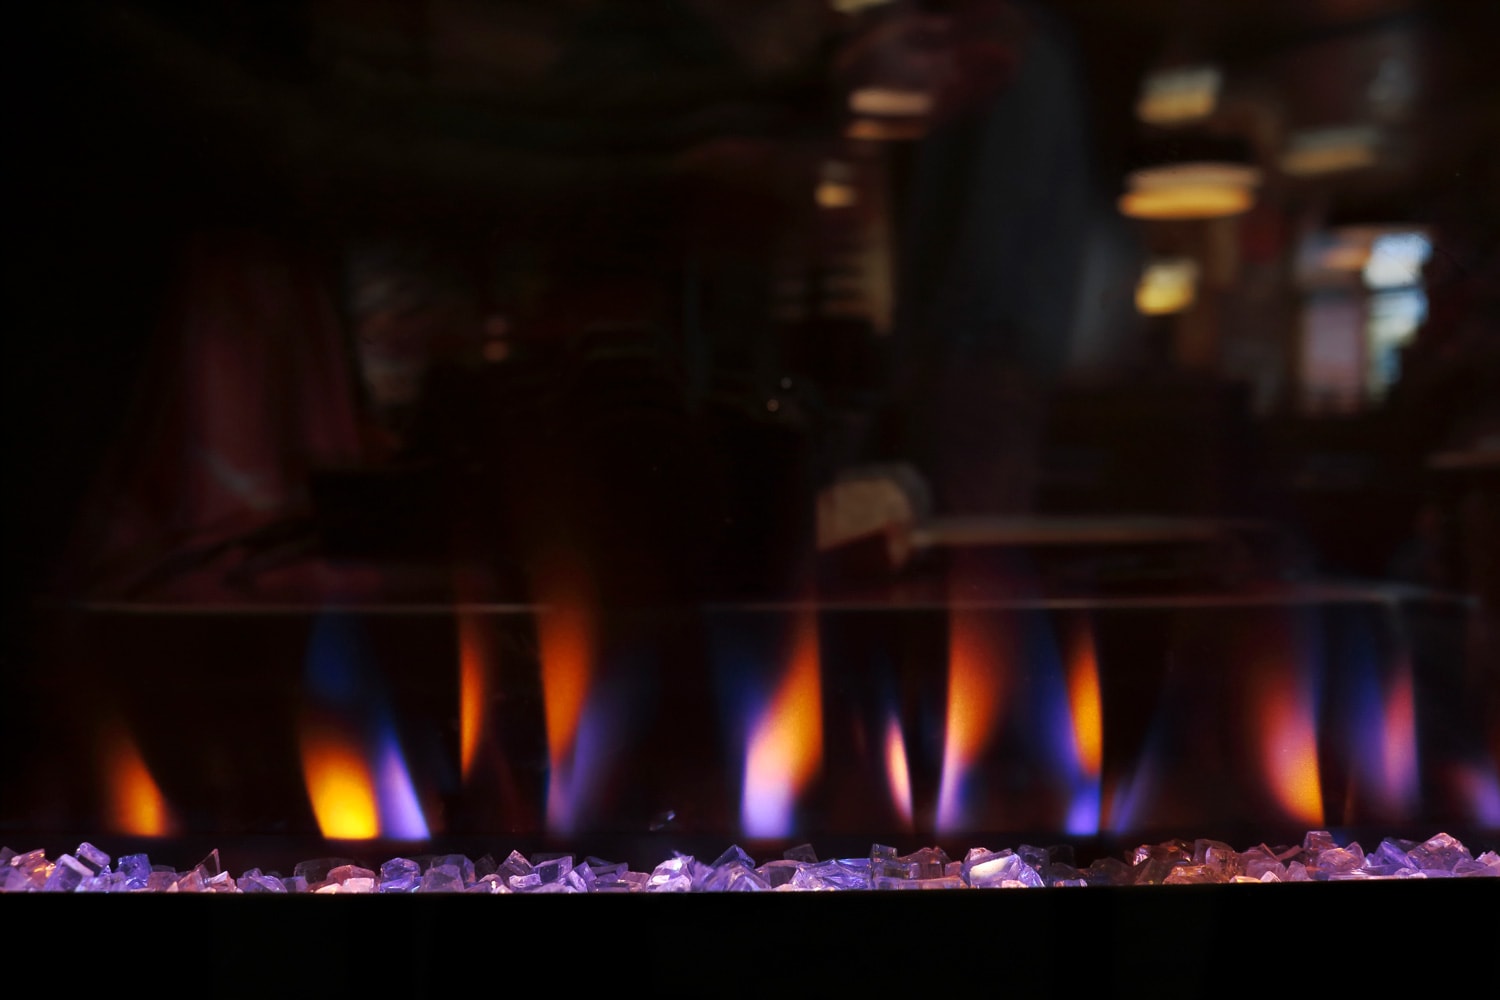 Electric stove as fireplace as a decorative heater in use. Reflection of the interior of a lounge or restaurant on the front panel.